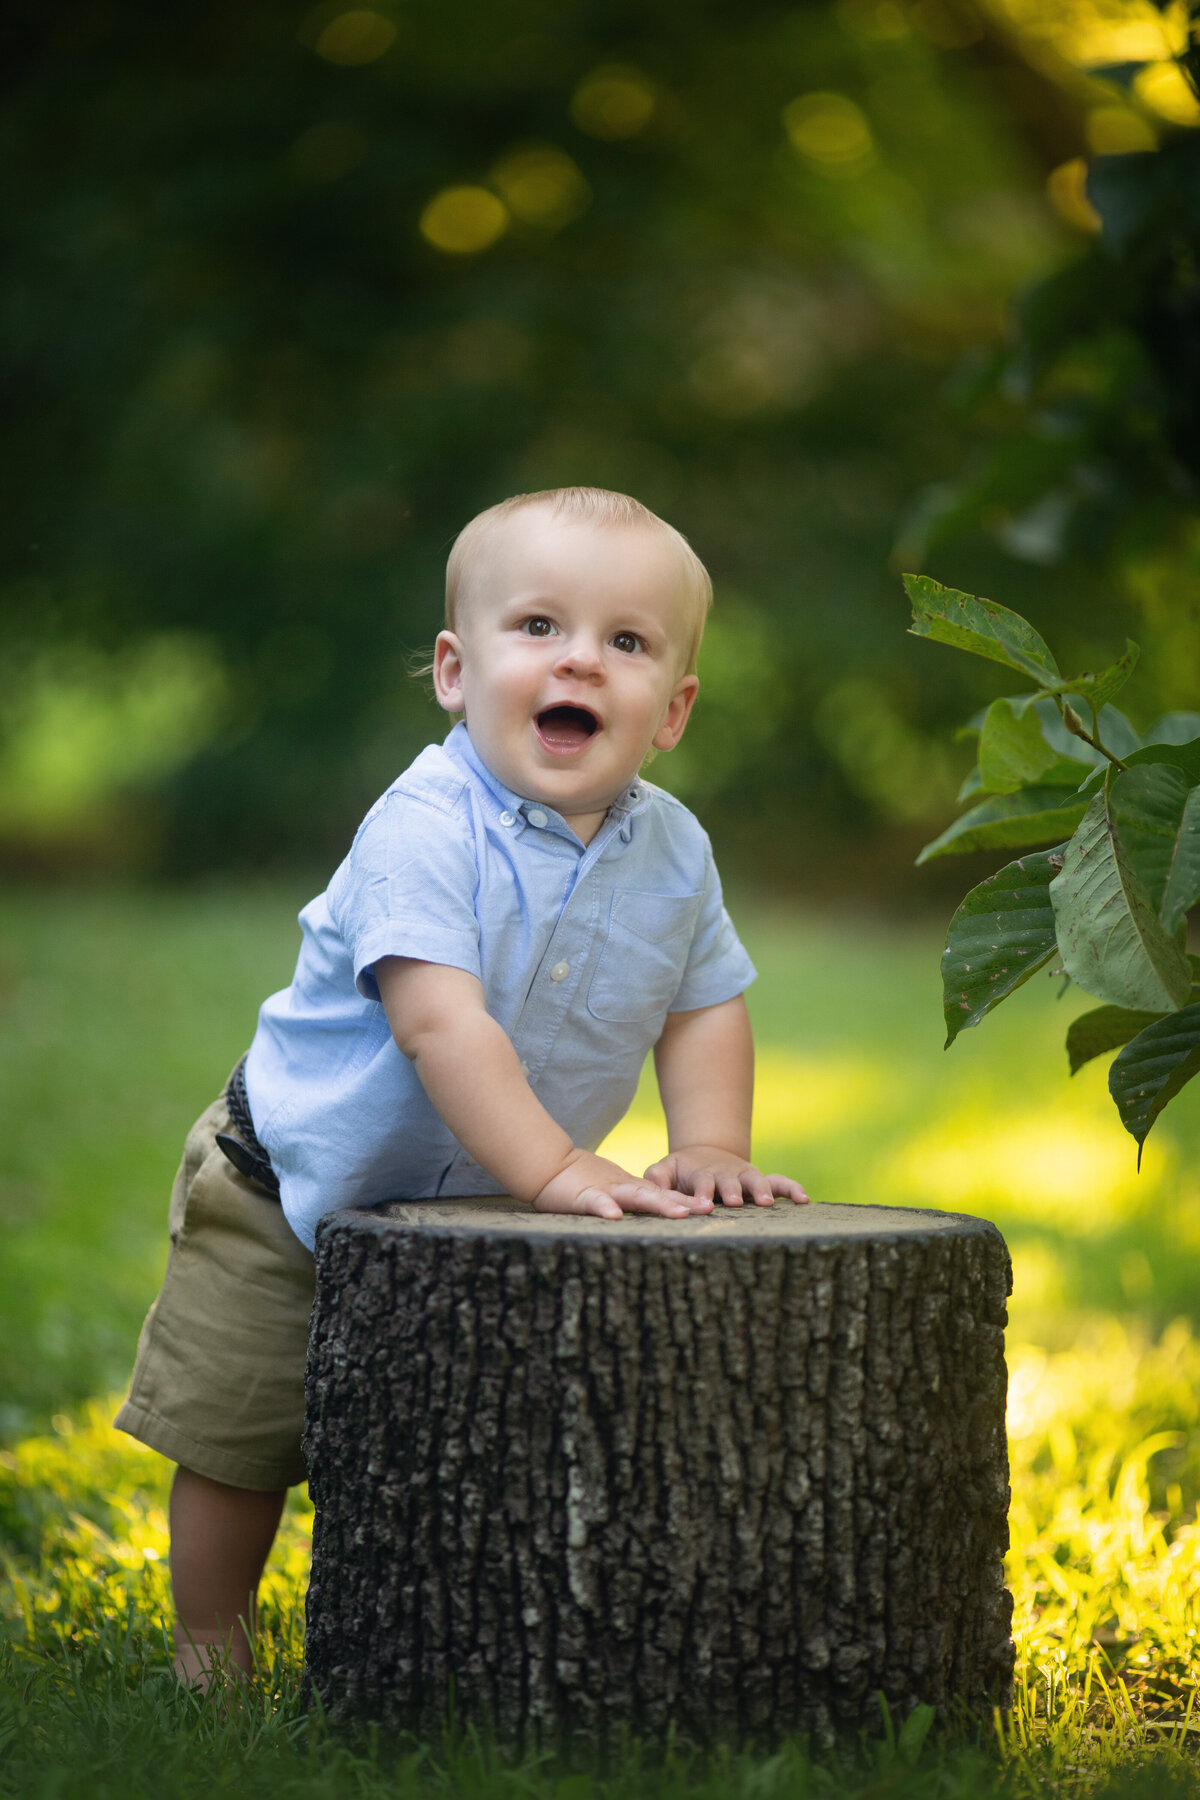 A happy toddler boy in a blue shirt plays on a large stump in a park